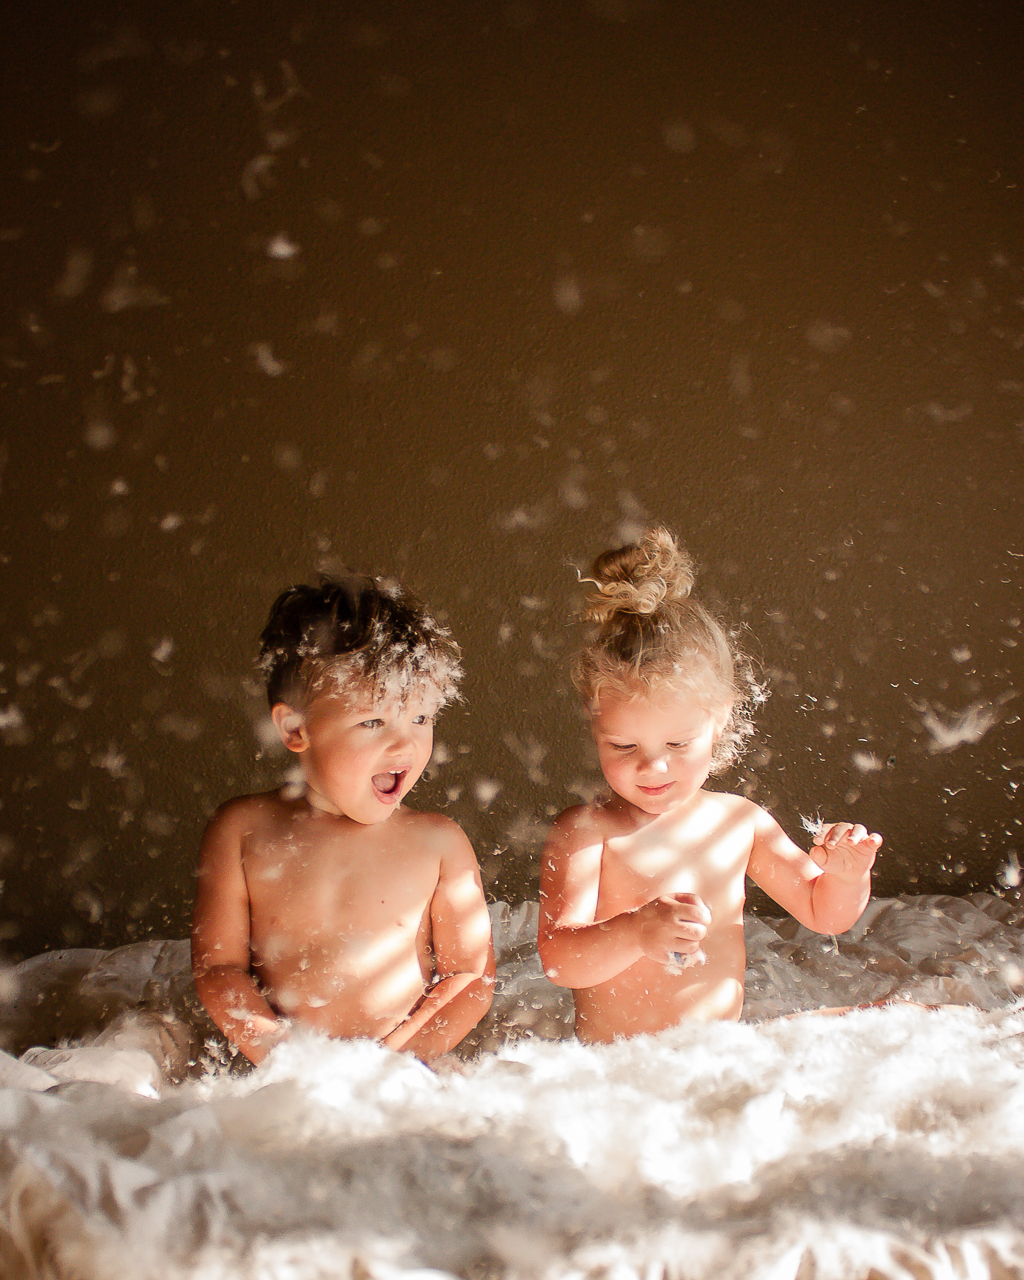 How to Make Your Own Snow (Indoors!)